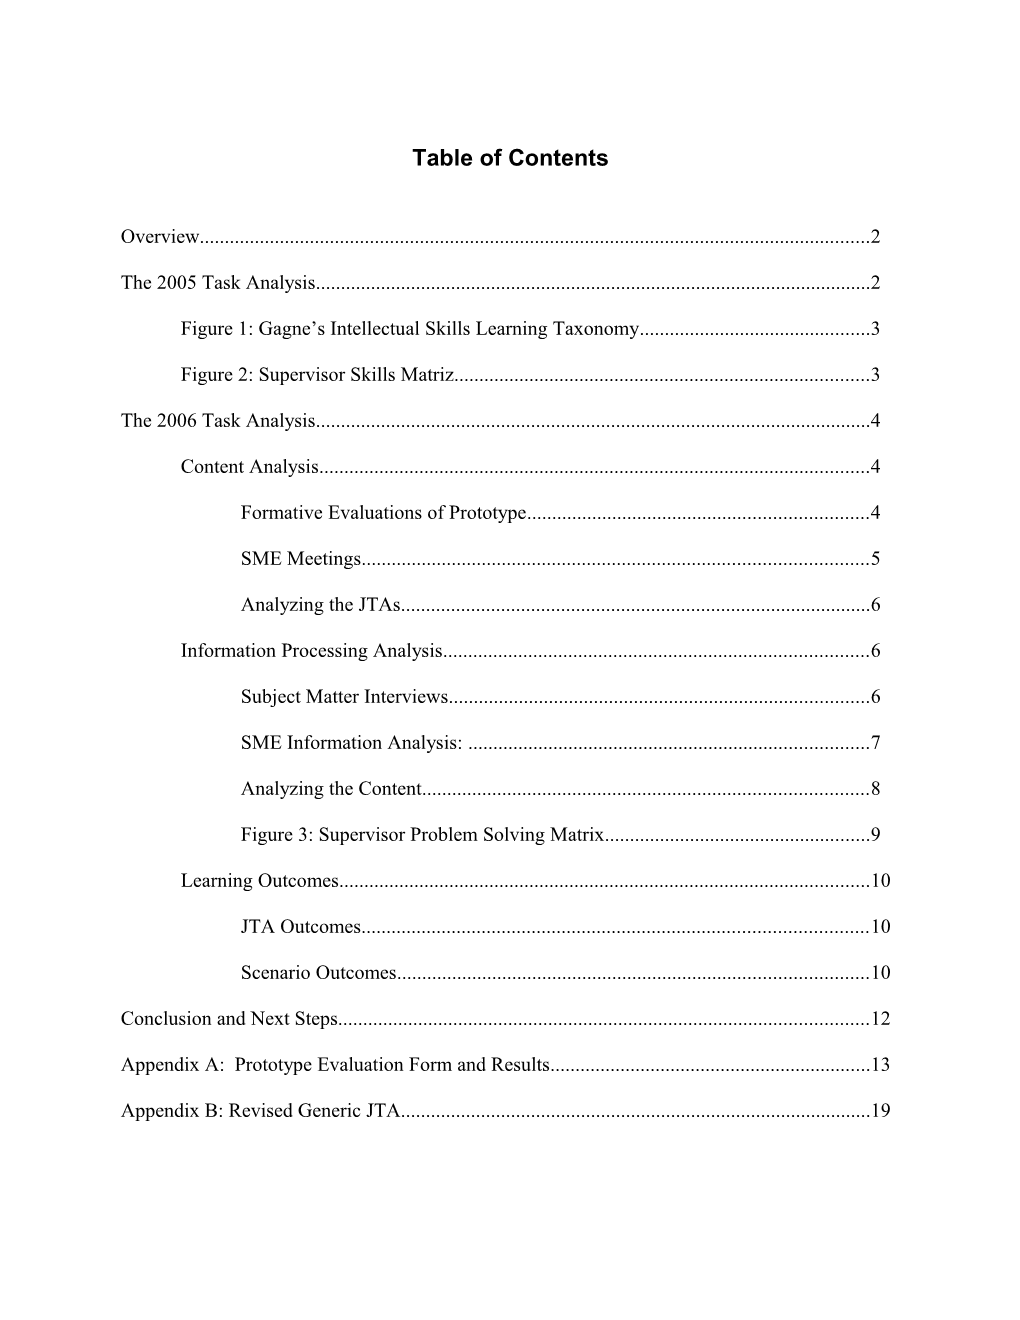 Table of Contents s419